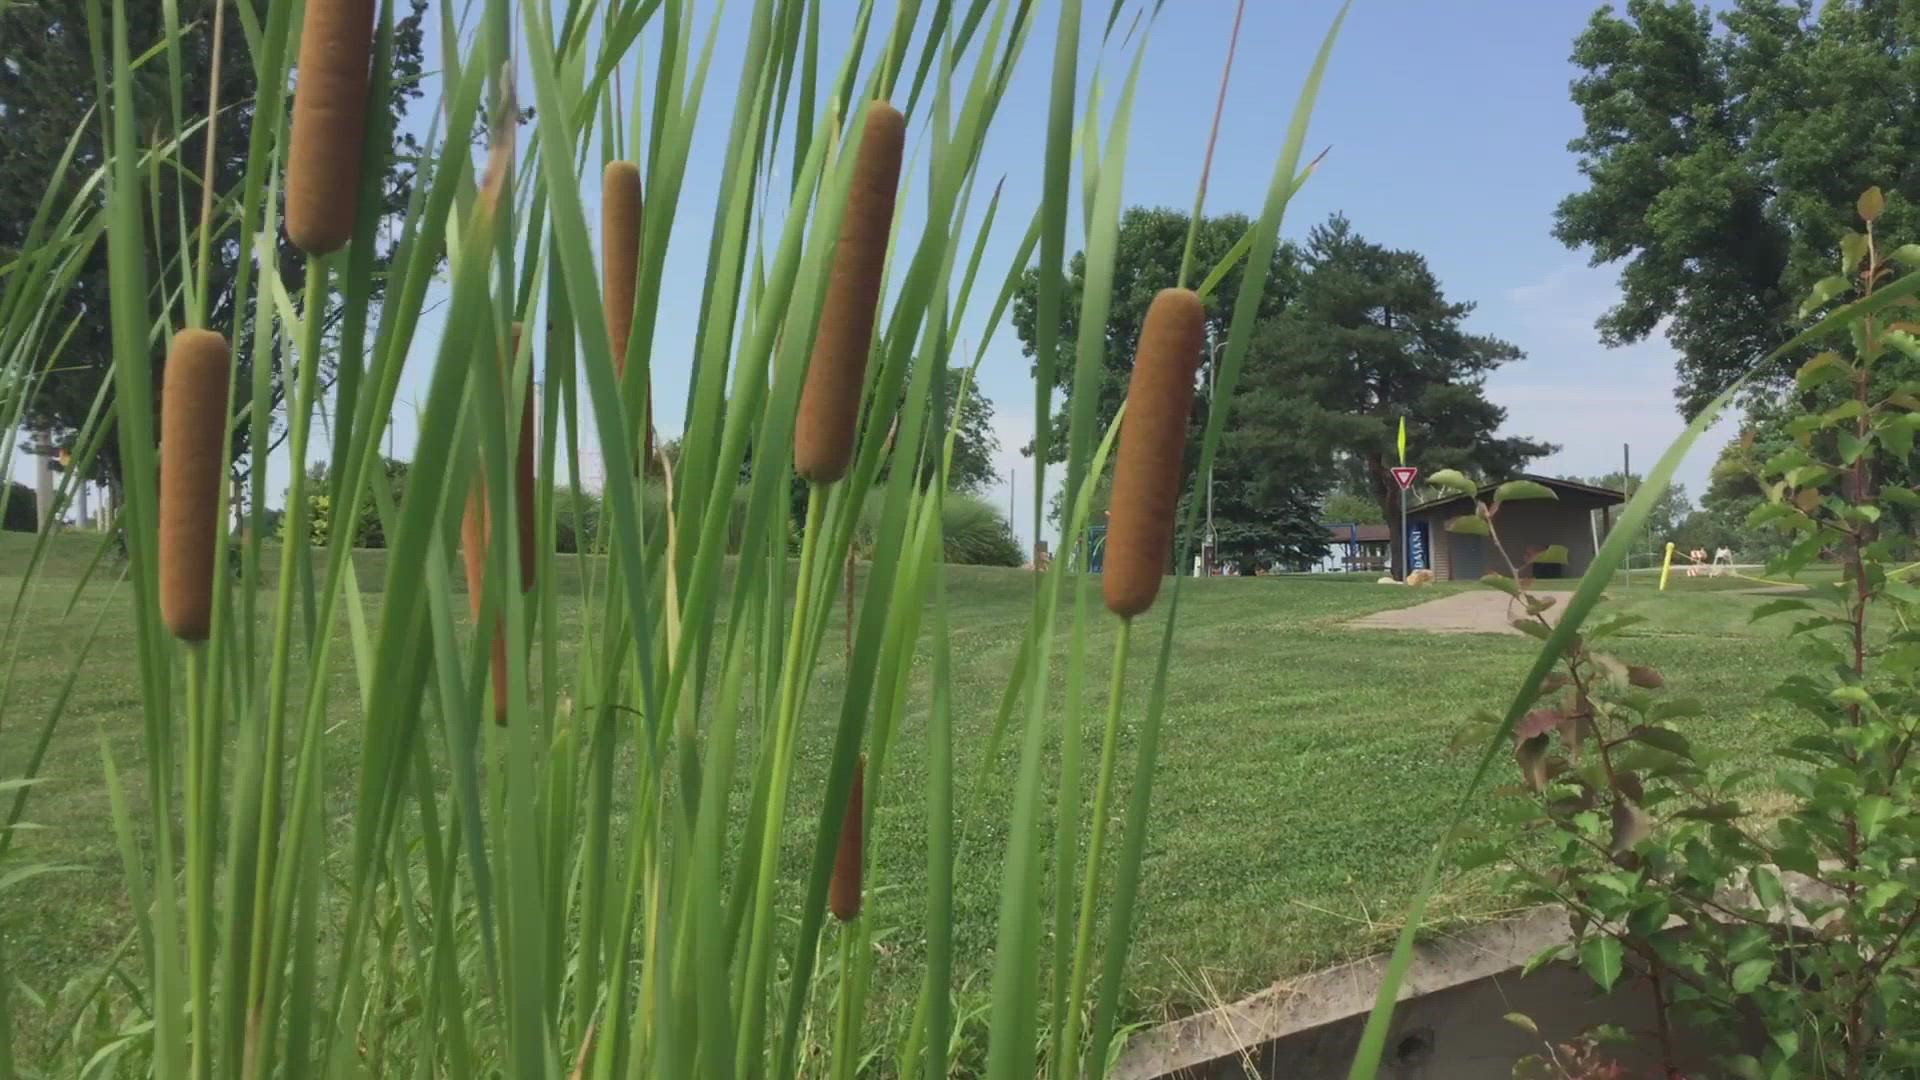 WQAD takes you through the multiple facilities that make Bettendorf's Crow Creek Park a great place for outdoor hobbyists.